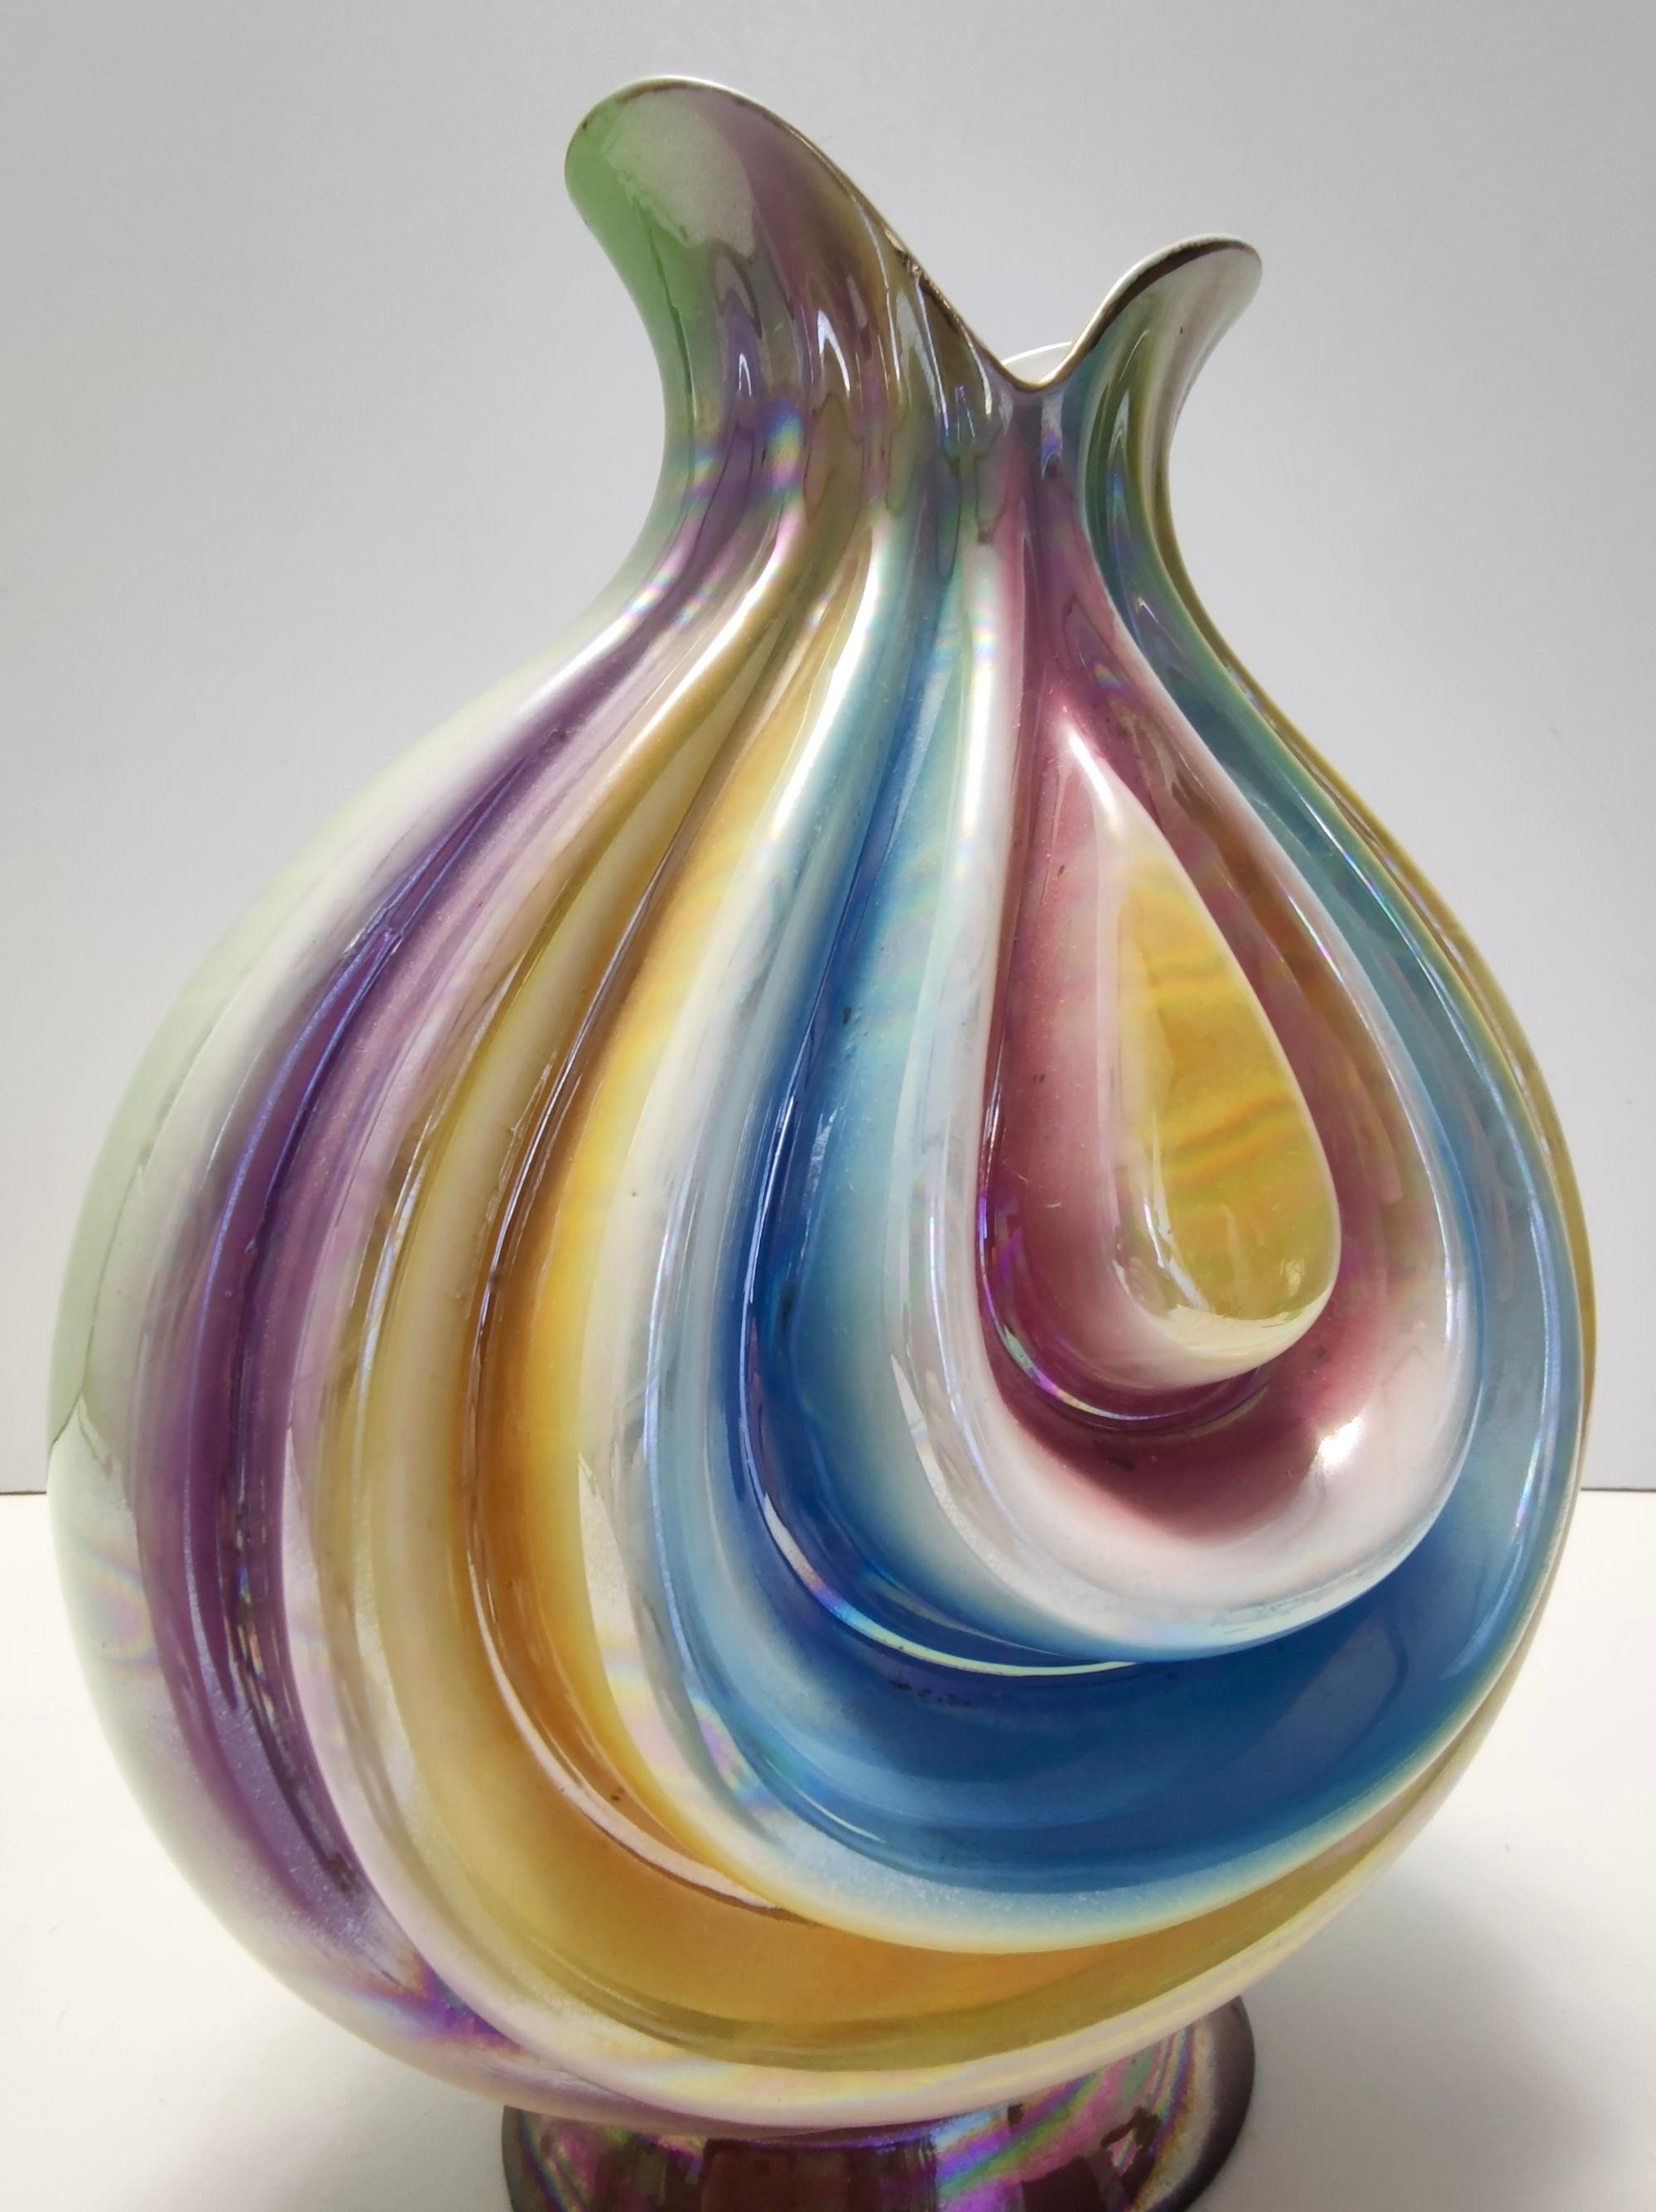 Vintage Ceramic Vase Attributed to Italo Casini with Iridescent Colors, Italy For Sale 1